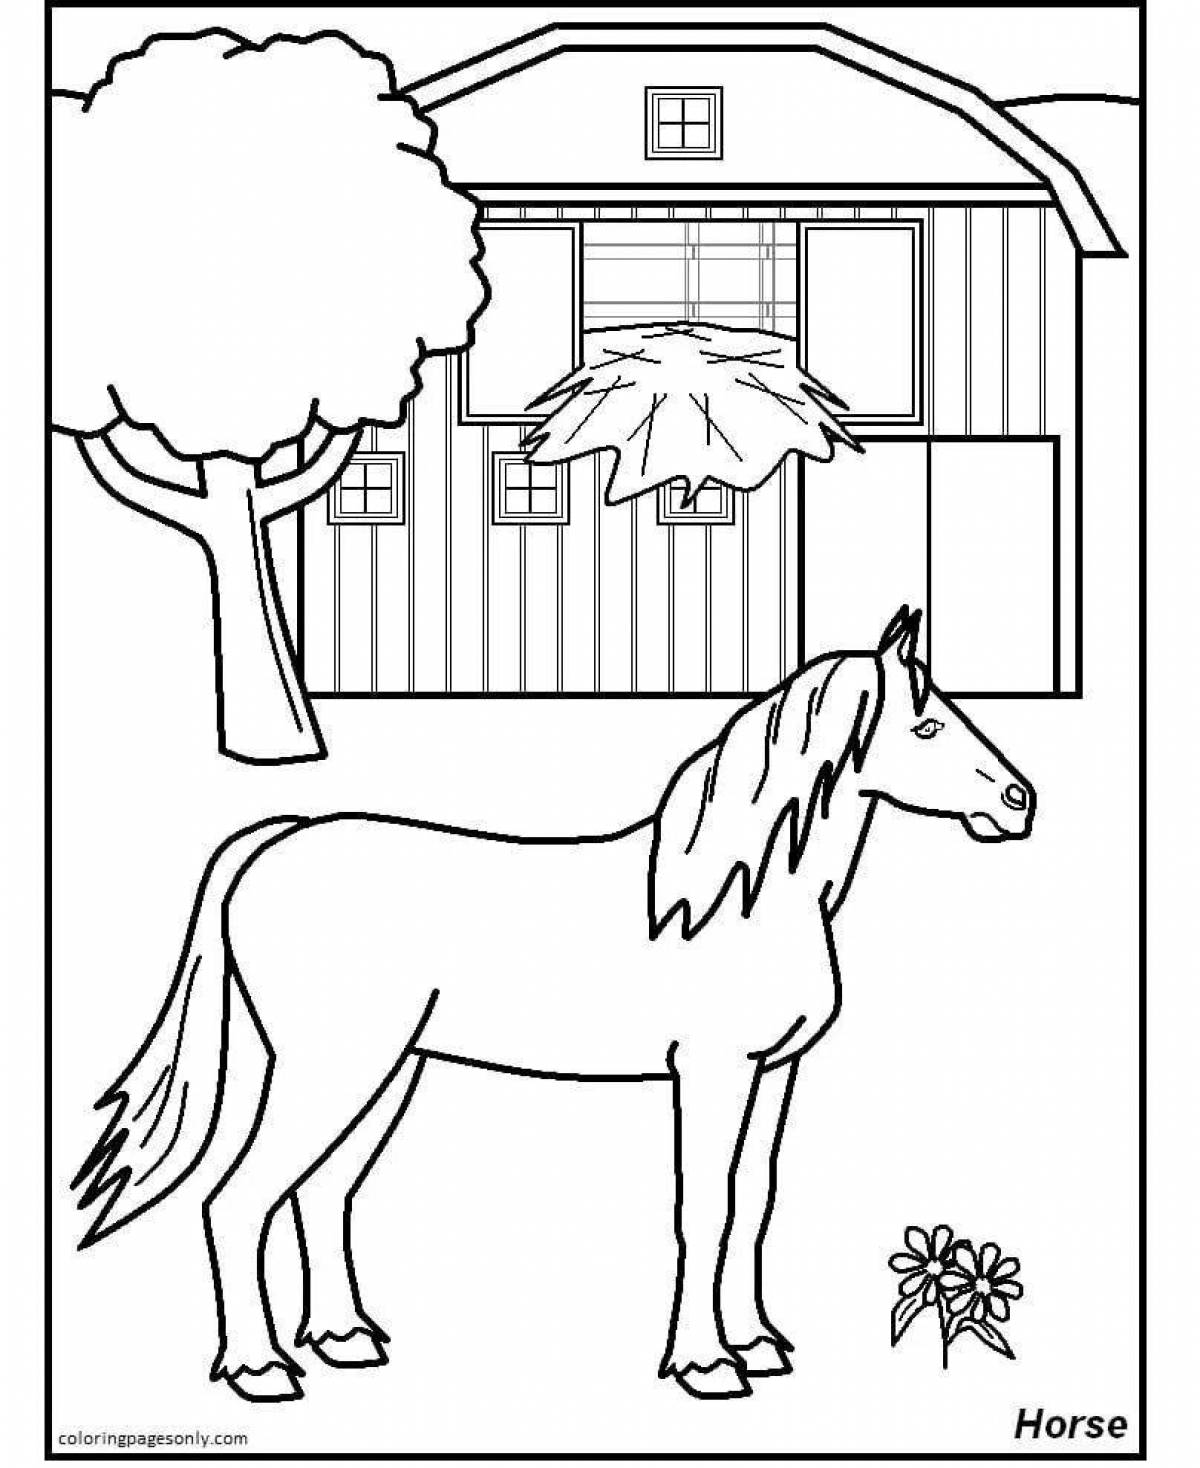 Fabulous animal house coloring page